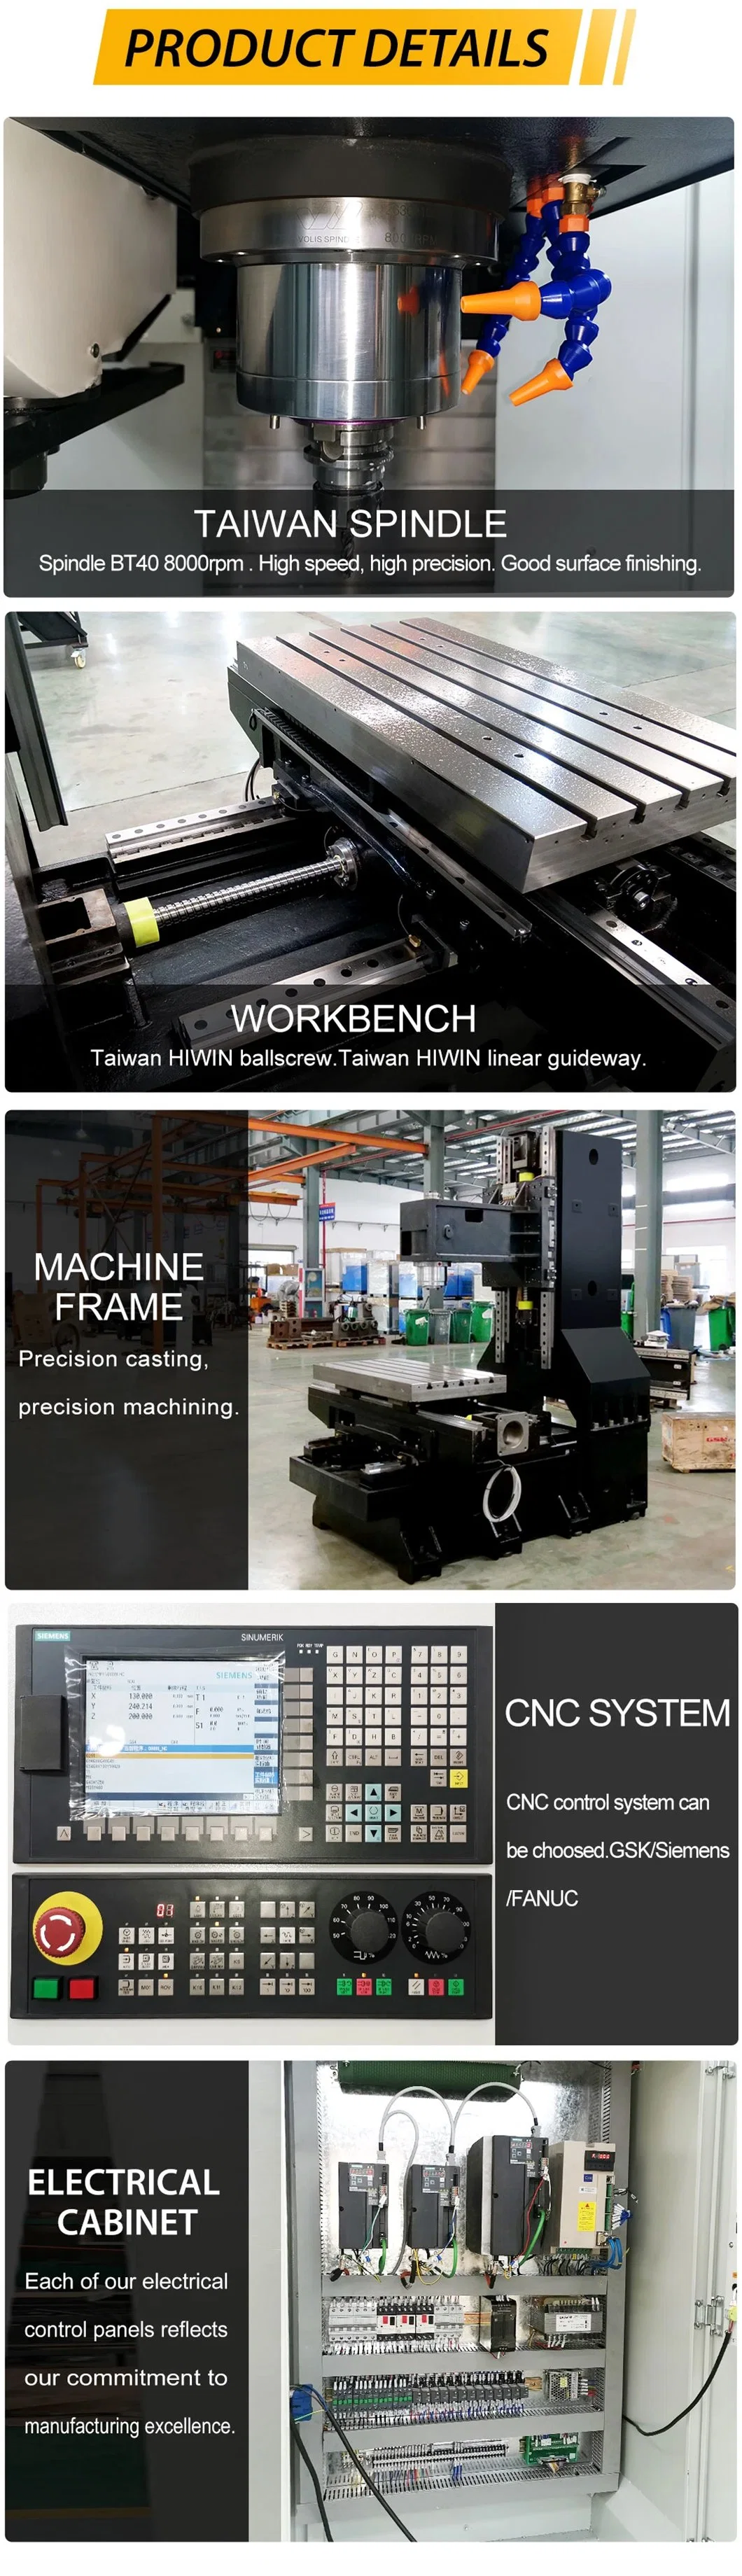 UC-400 Heavy Duty Automatic Changer Metalworking Vertical CNC Milling Machine with Metal Processing with 5 Axis